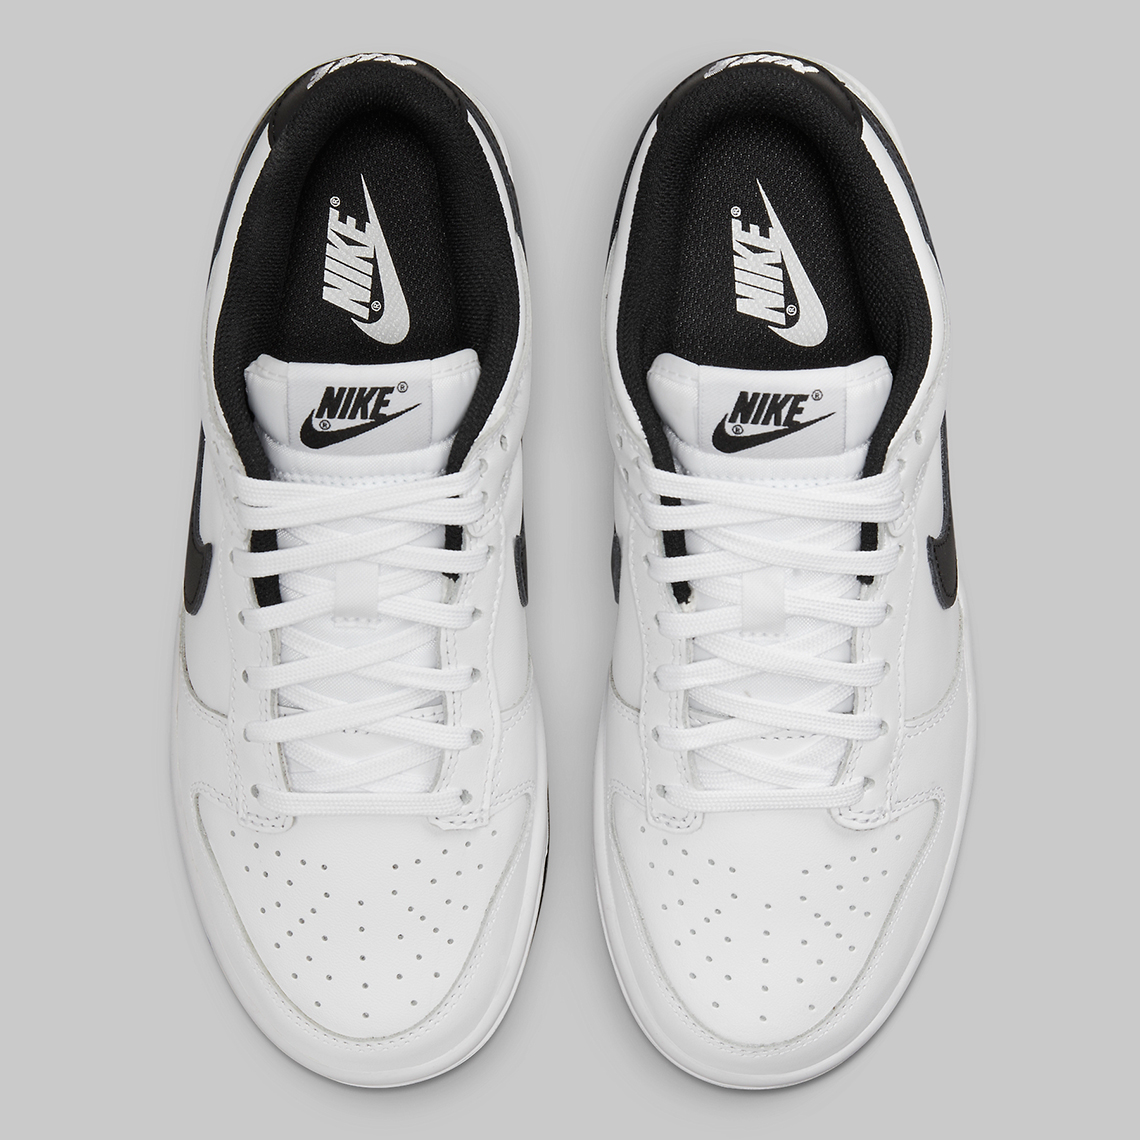 nike china Dunk low womens white black DD1503 113 release date 9